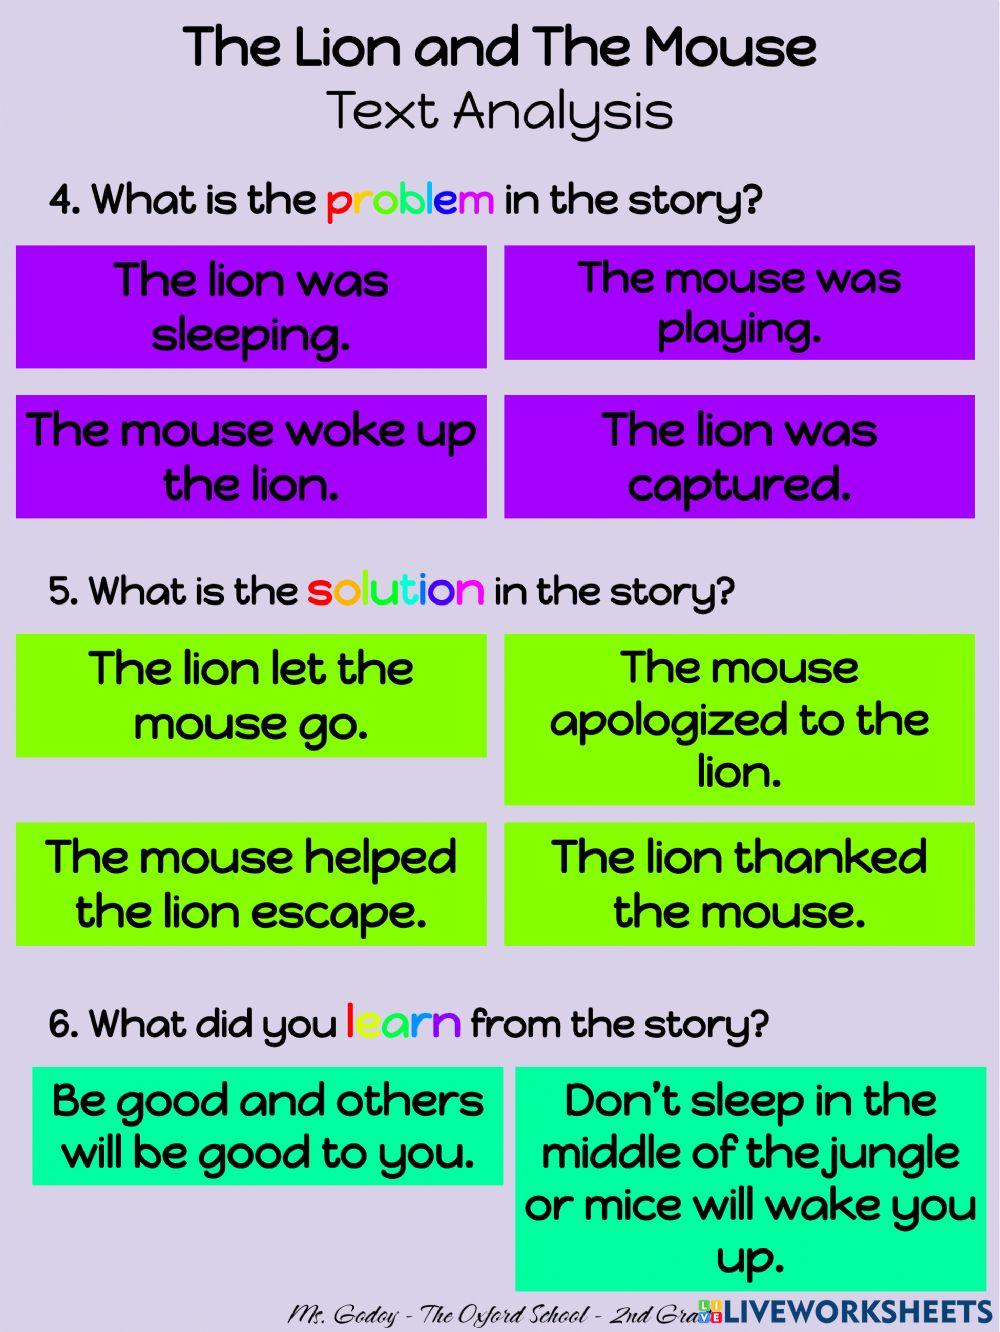 The Lion and The Mouse - Text Analysis